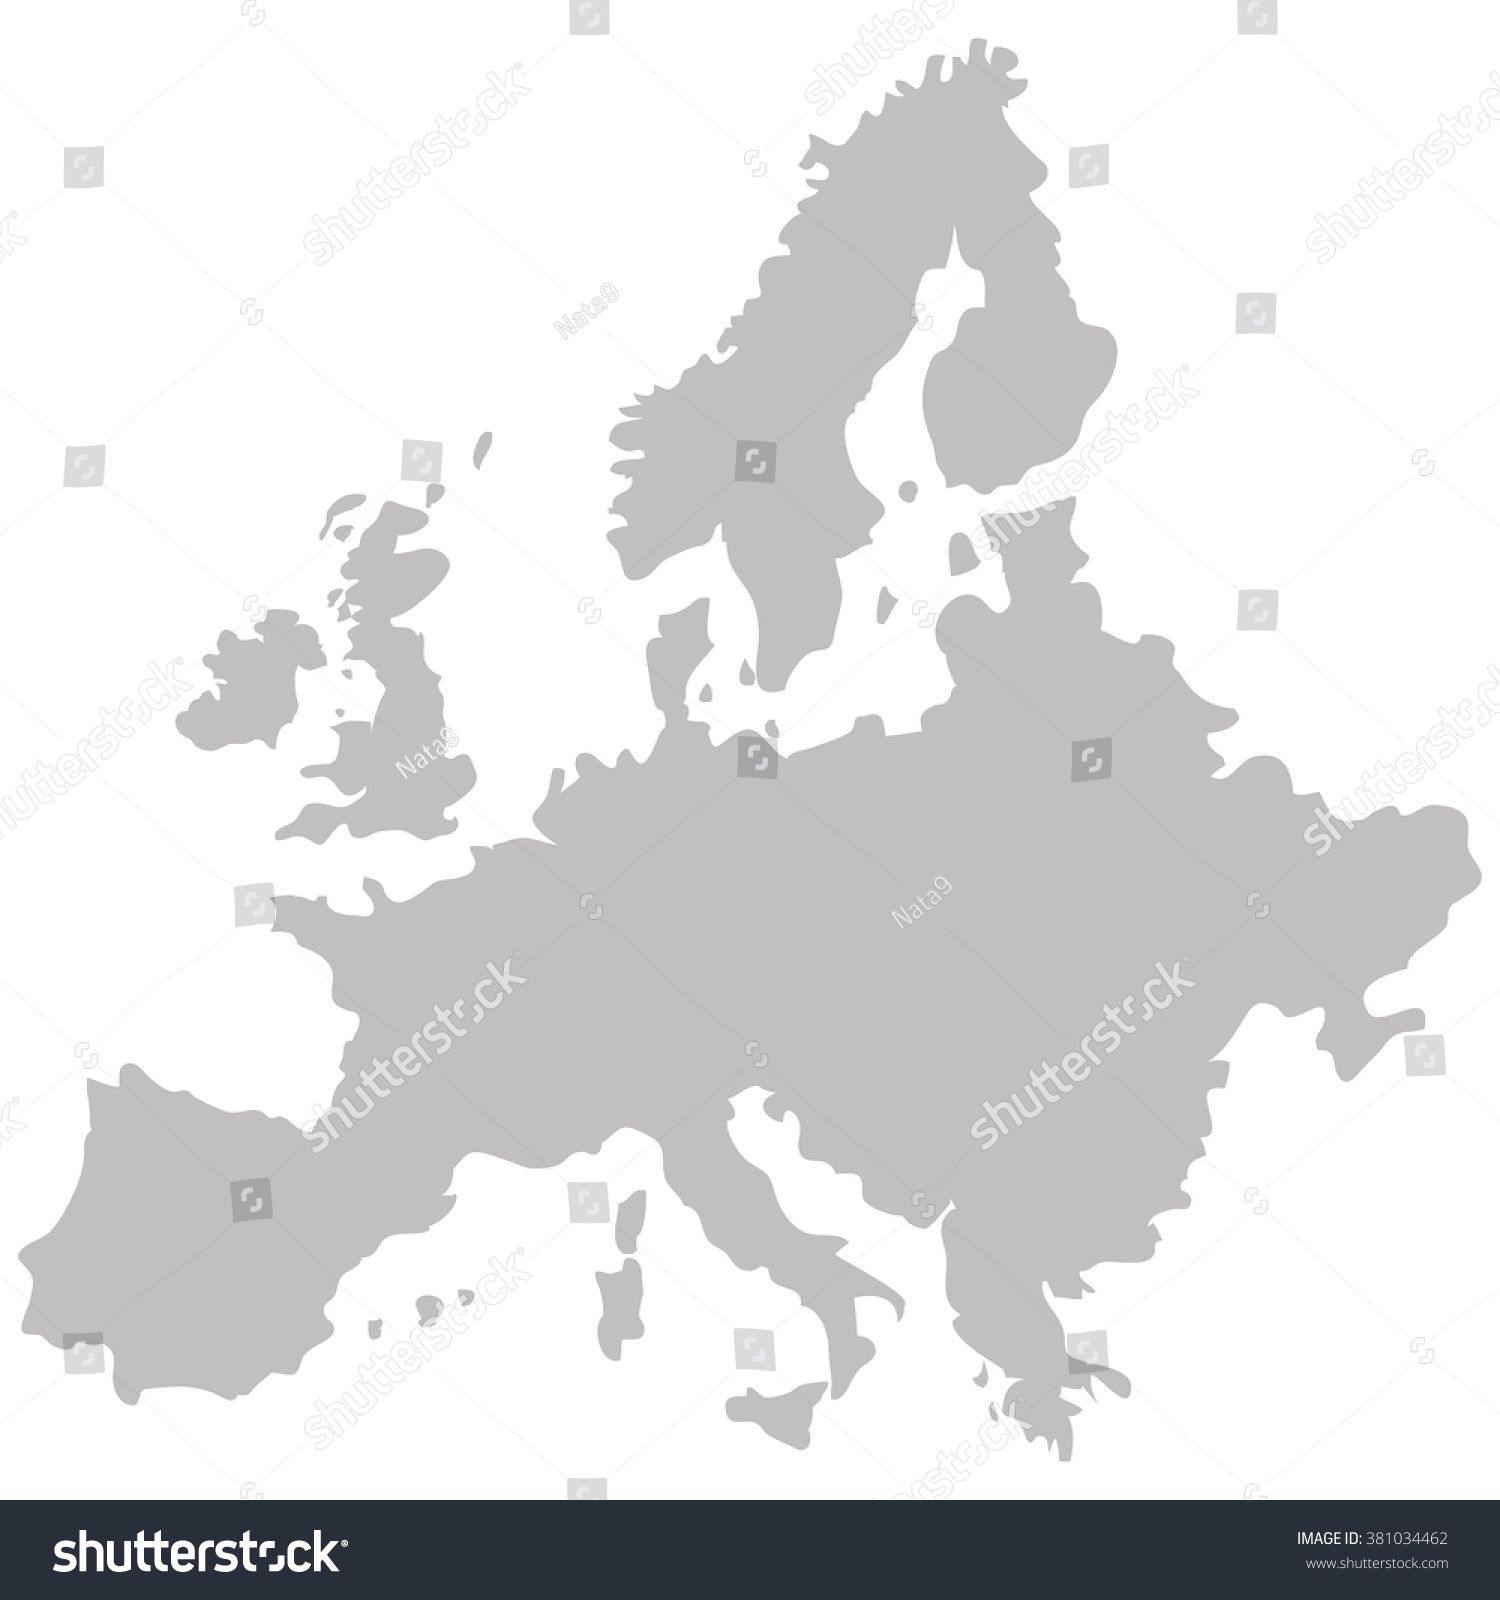 Map Europe Gray On White Background Stock Vector Royalty Free